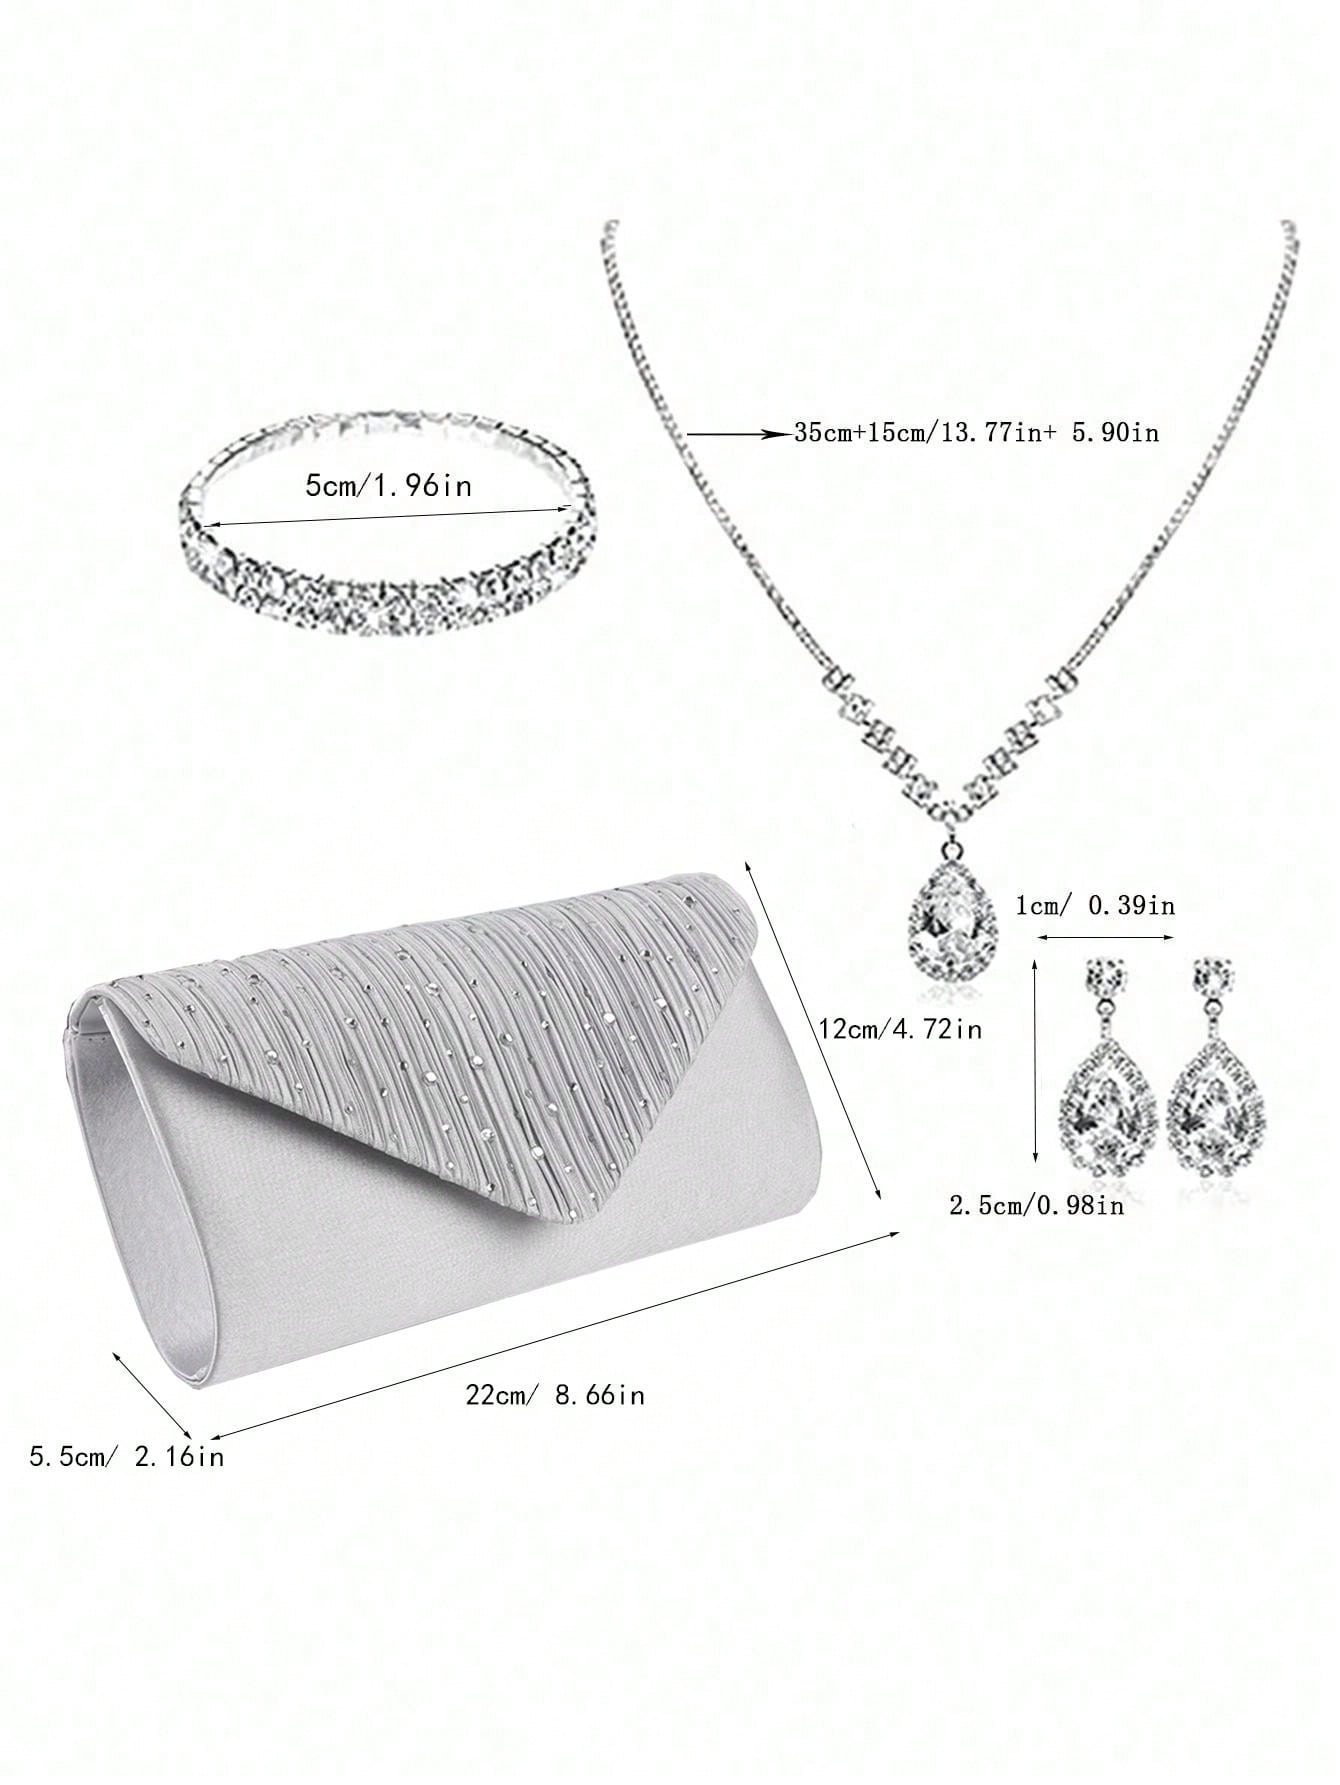 Elegant Rhinestone Clutch and Jewelry Set: Perfect Accessory for Women for Brides, Weddings, or any Special Occasions - Luxurious Gift